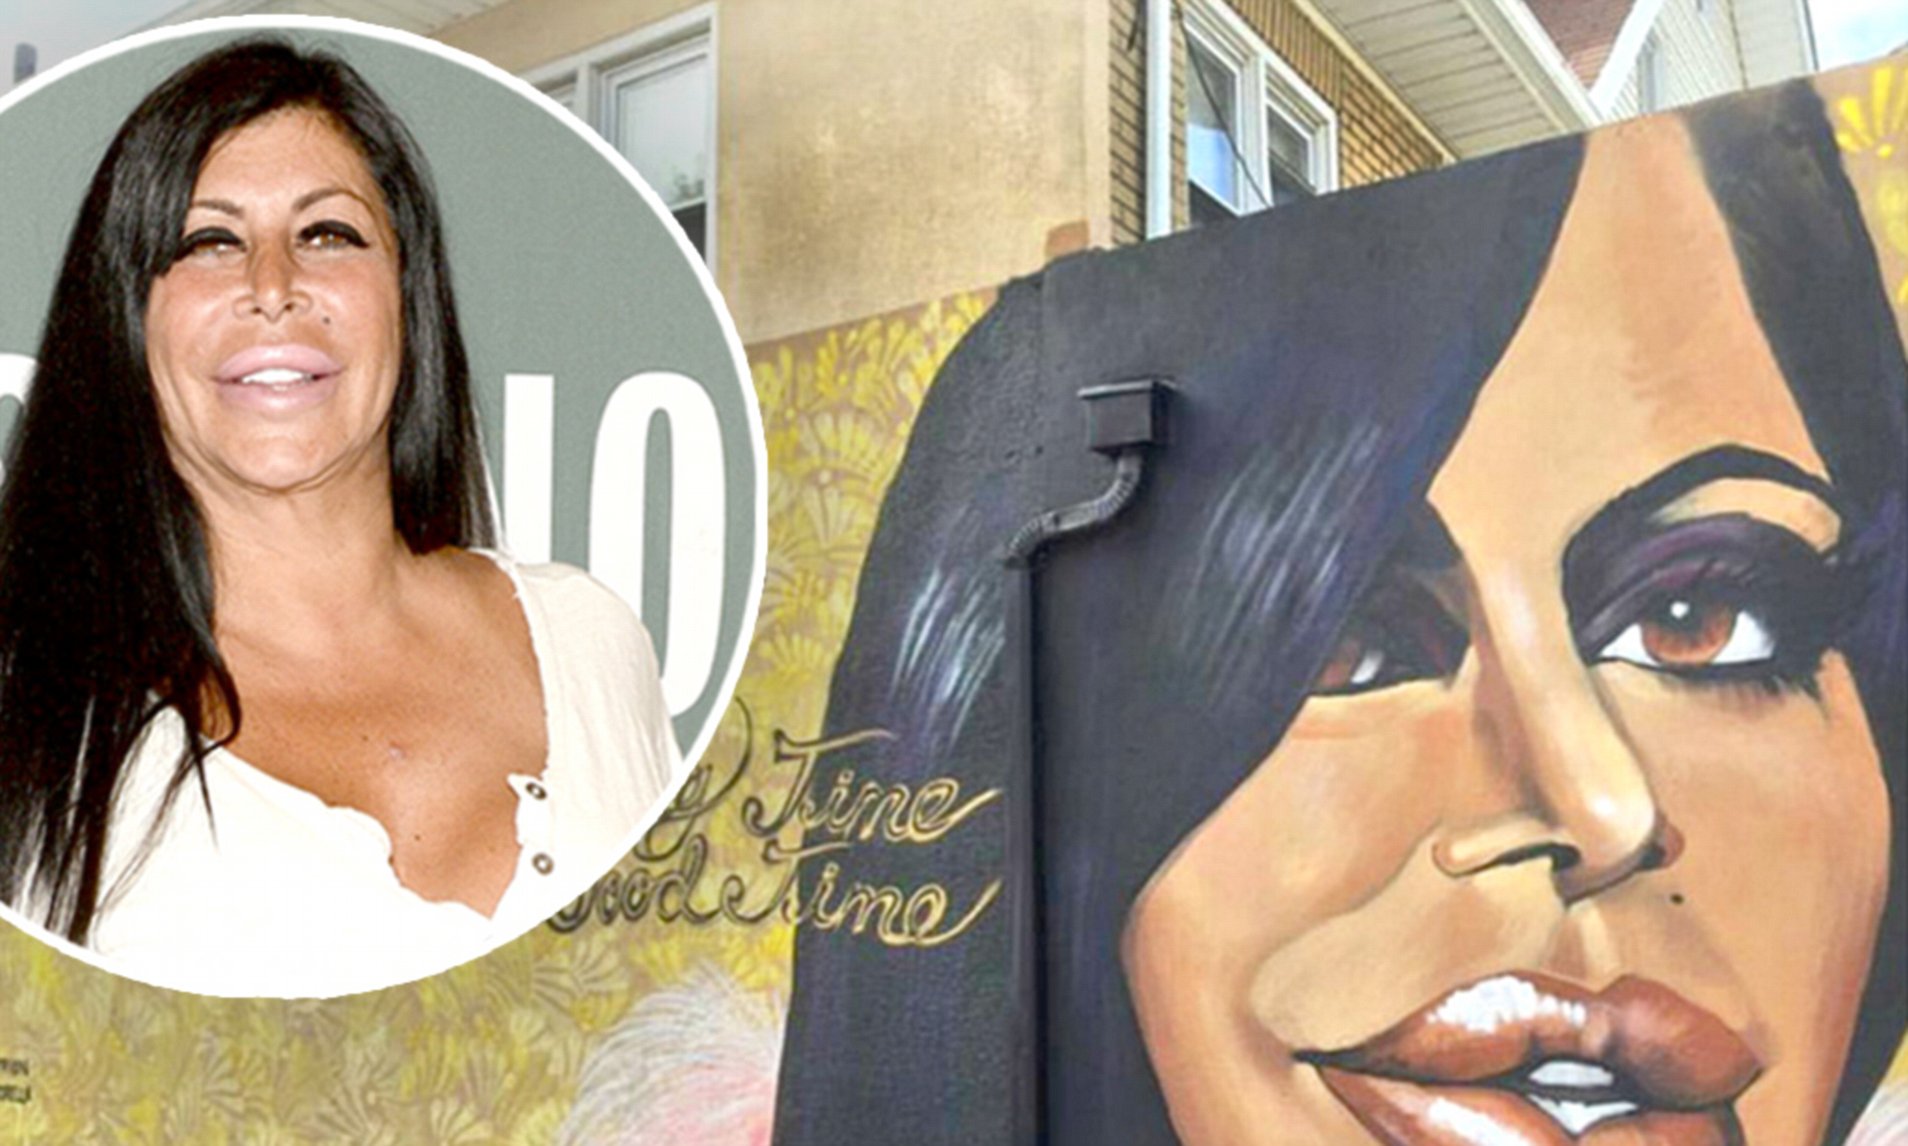 Big Ang Mural Covered: Sister Vows To Find New Location